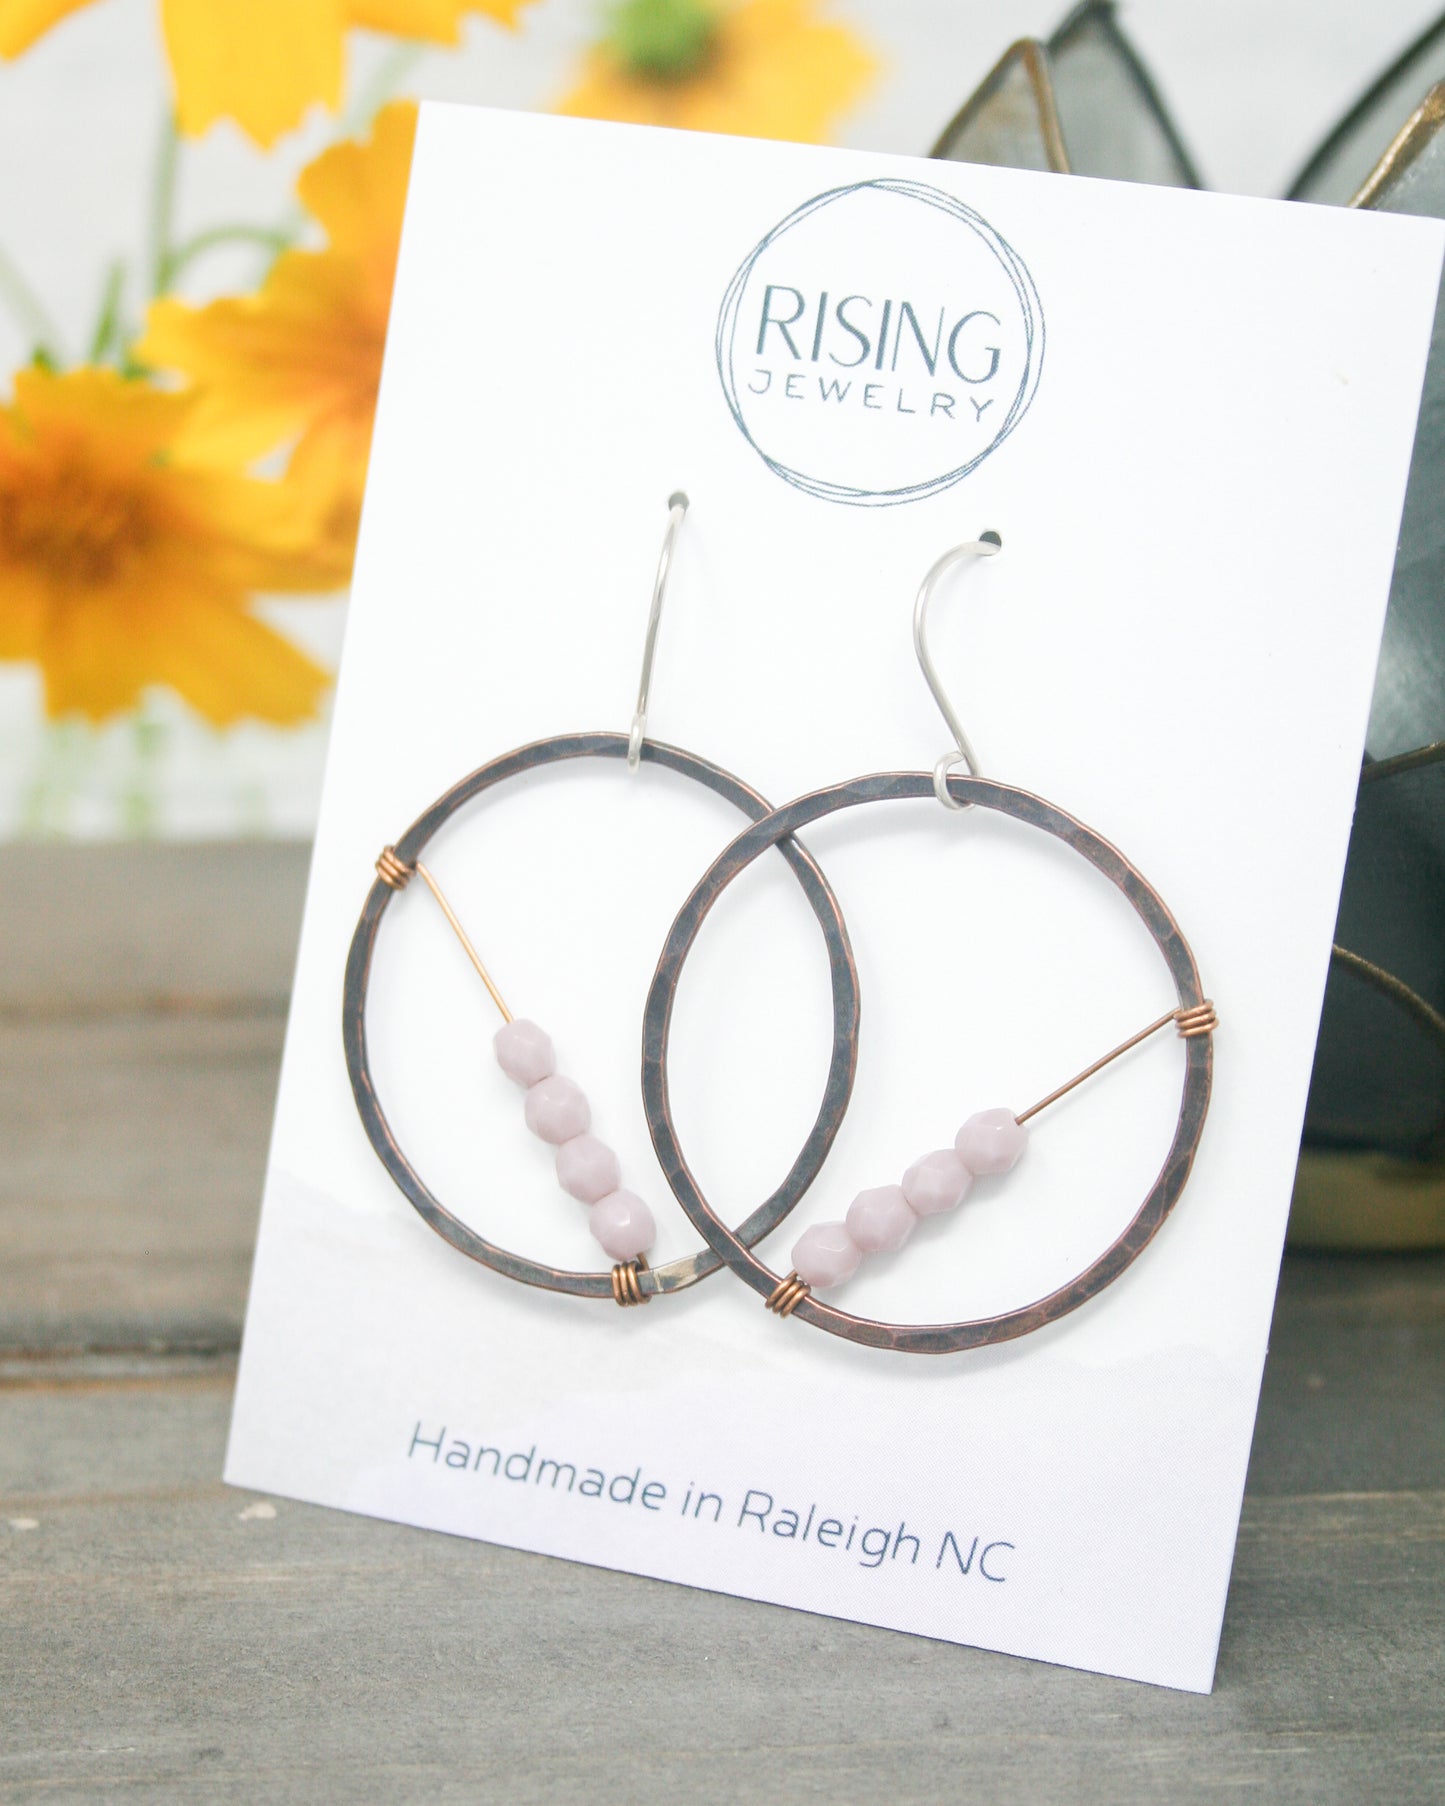 a picture of a pair of earrings on a card